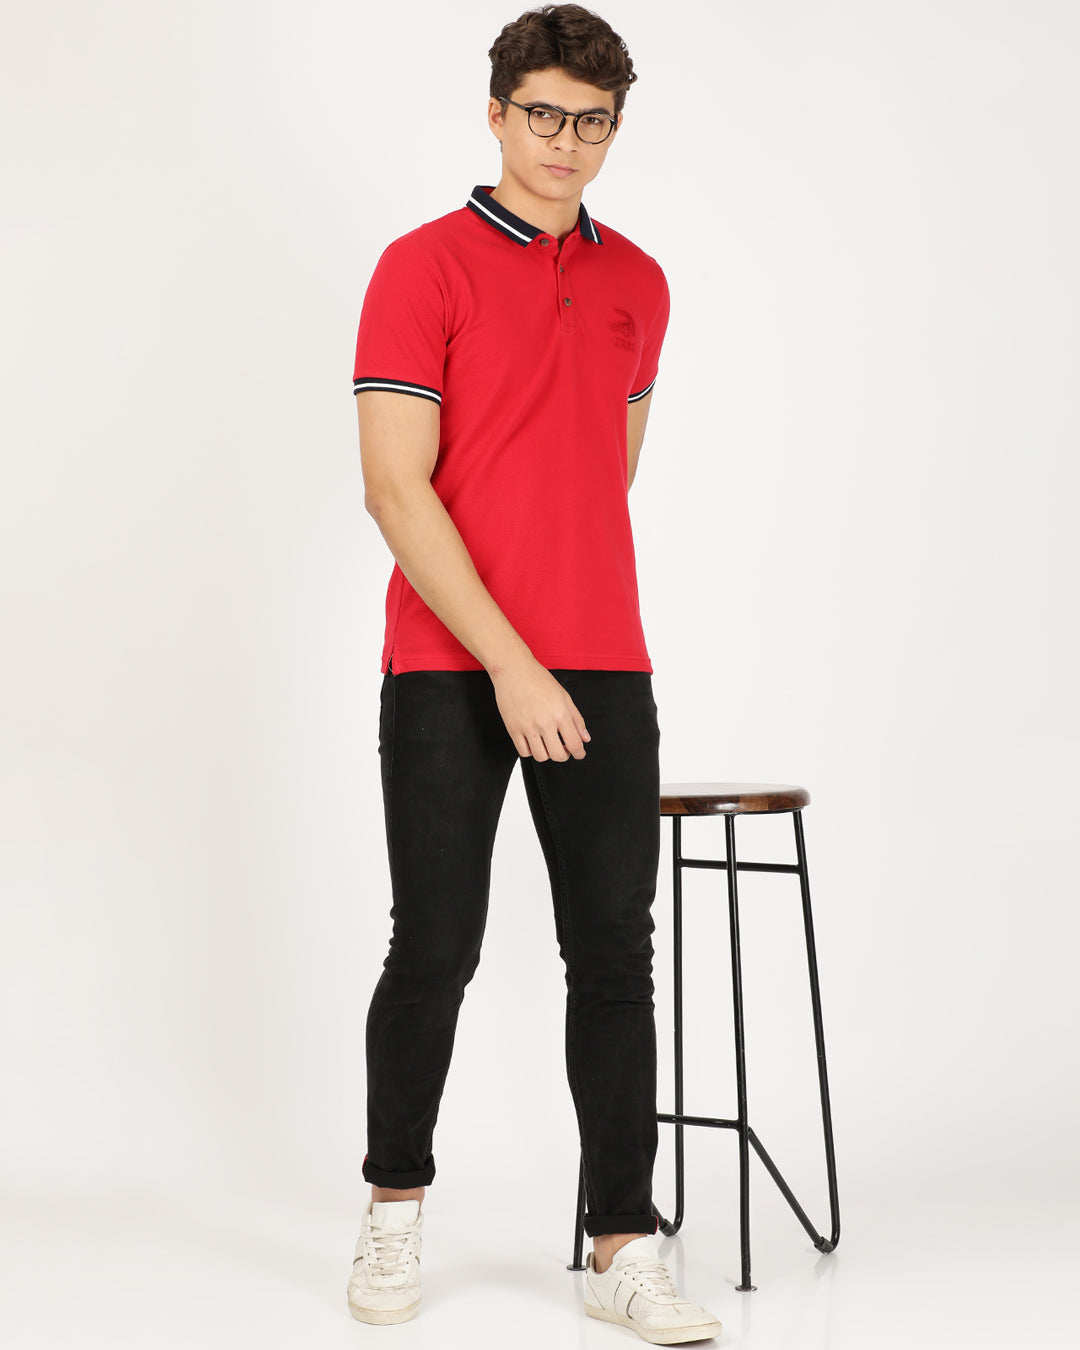 Crocodile Red Solid T-Shirt